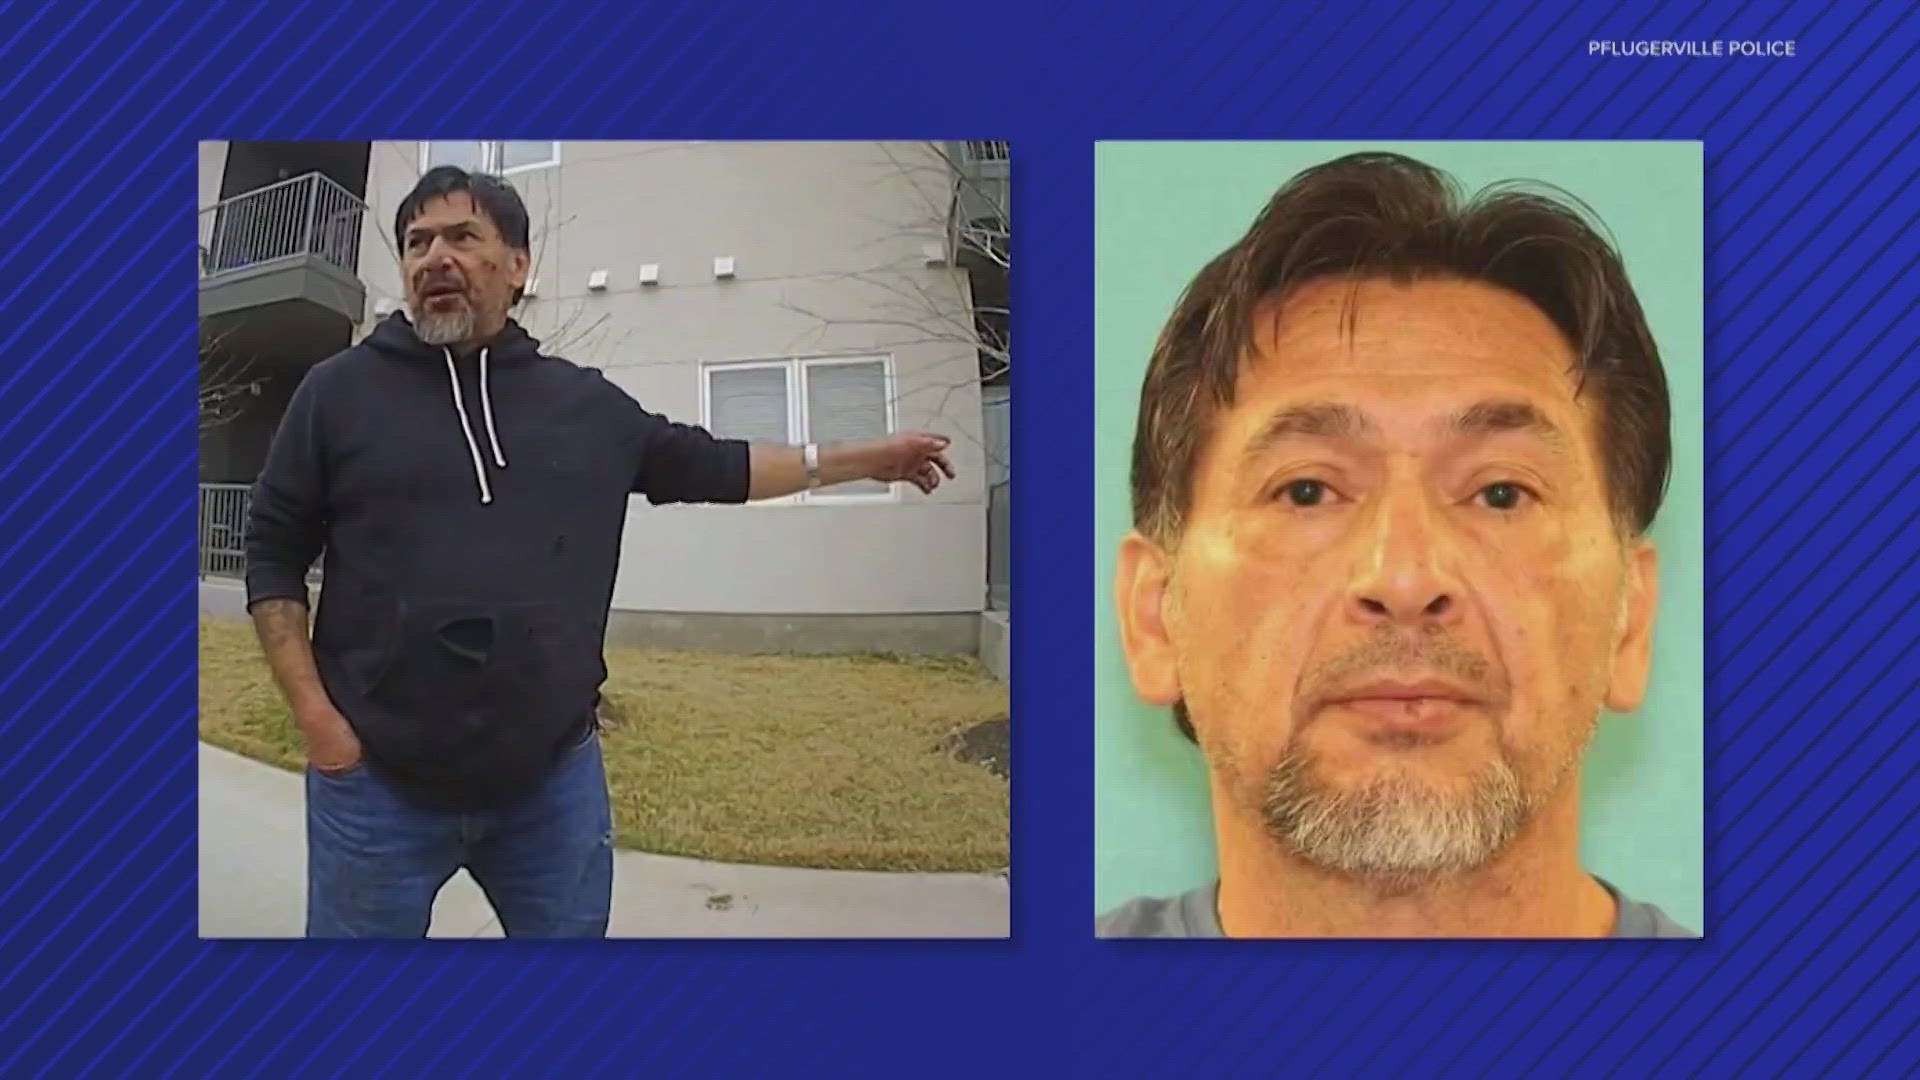 Raul Meza Jr. was also convicted in 1982 for the murder of an 8-year-old girl. Police said he could be connected with up to 10 other cold cases.